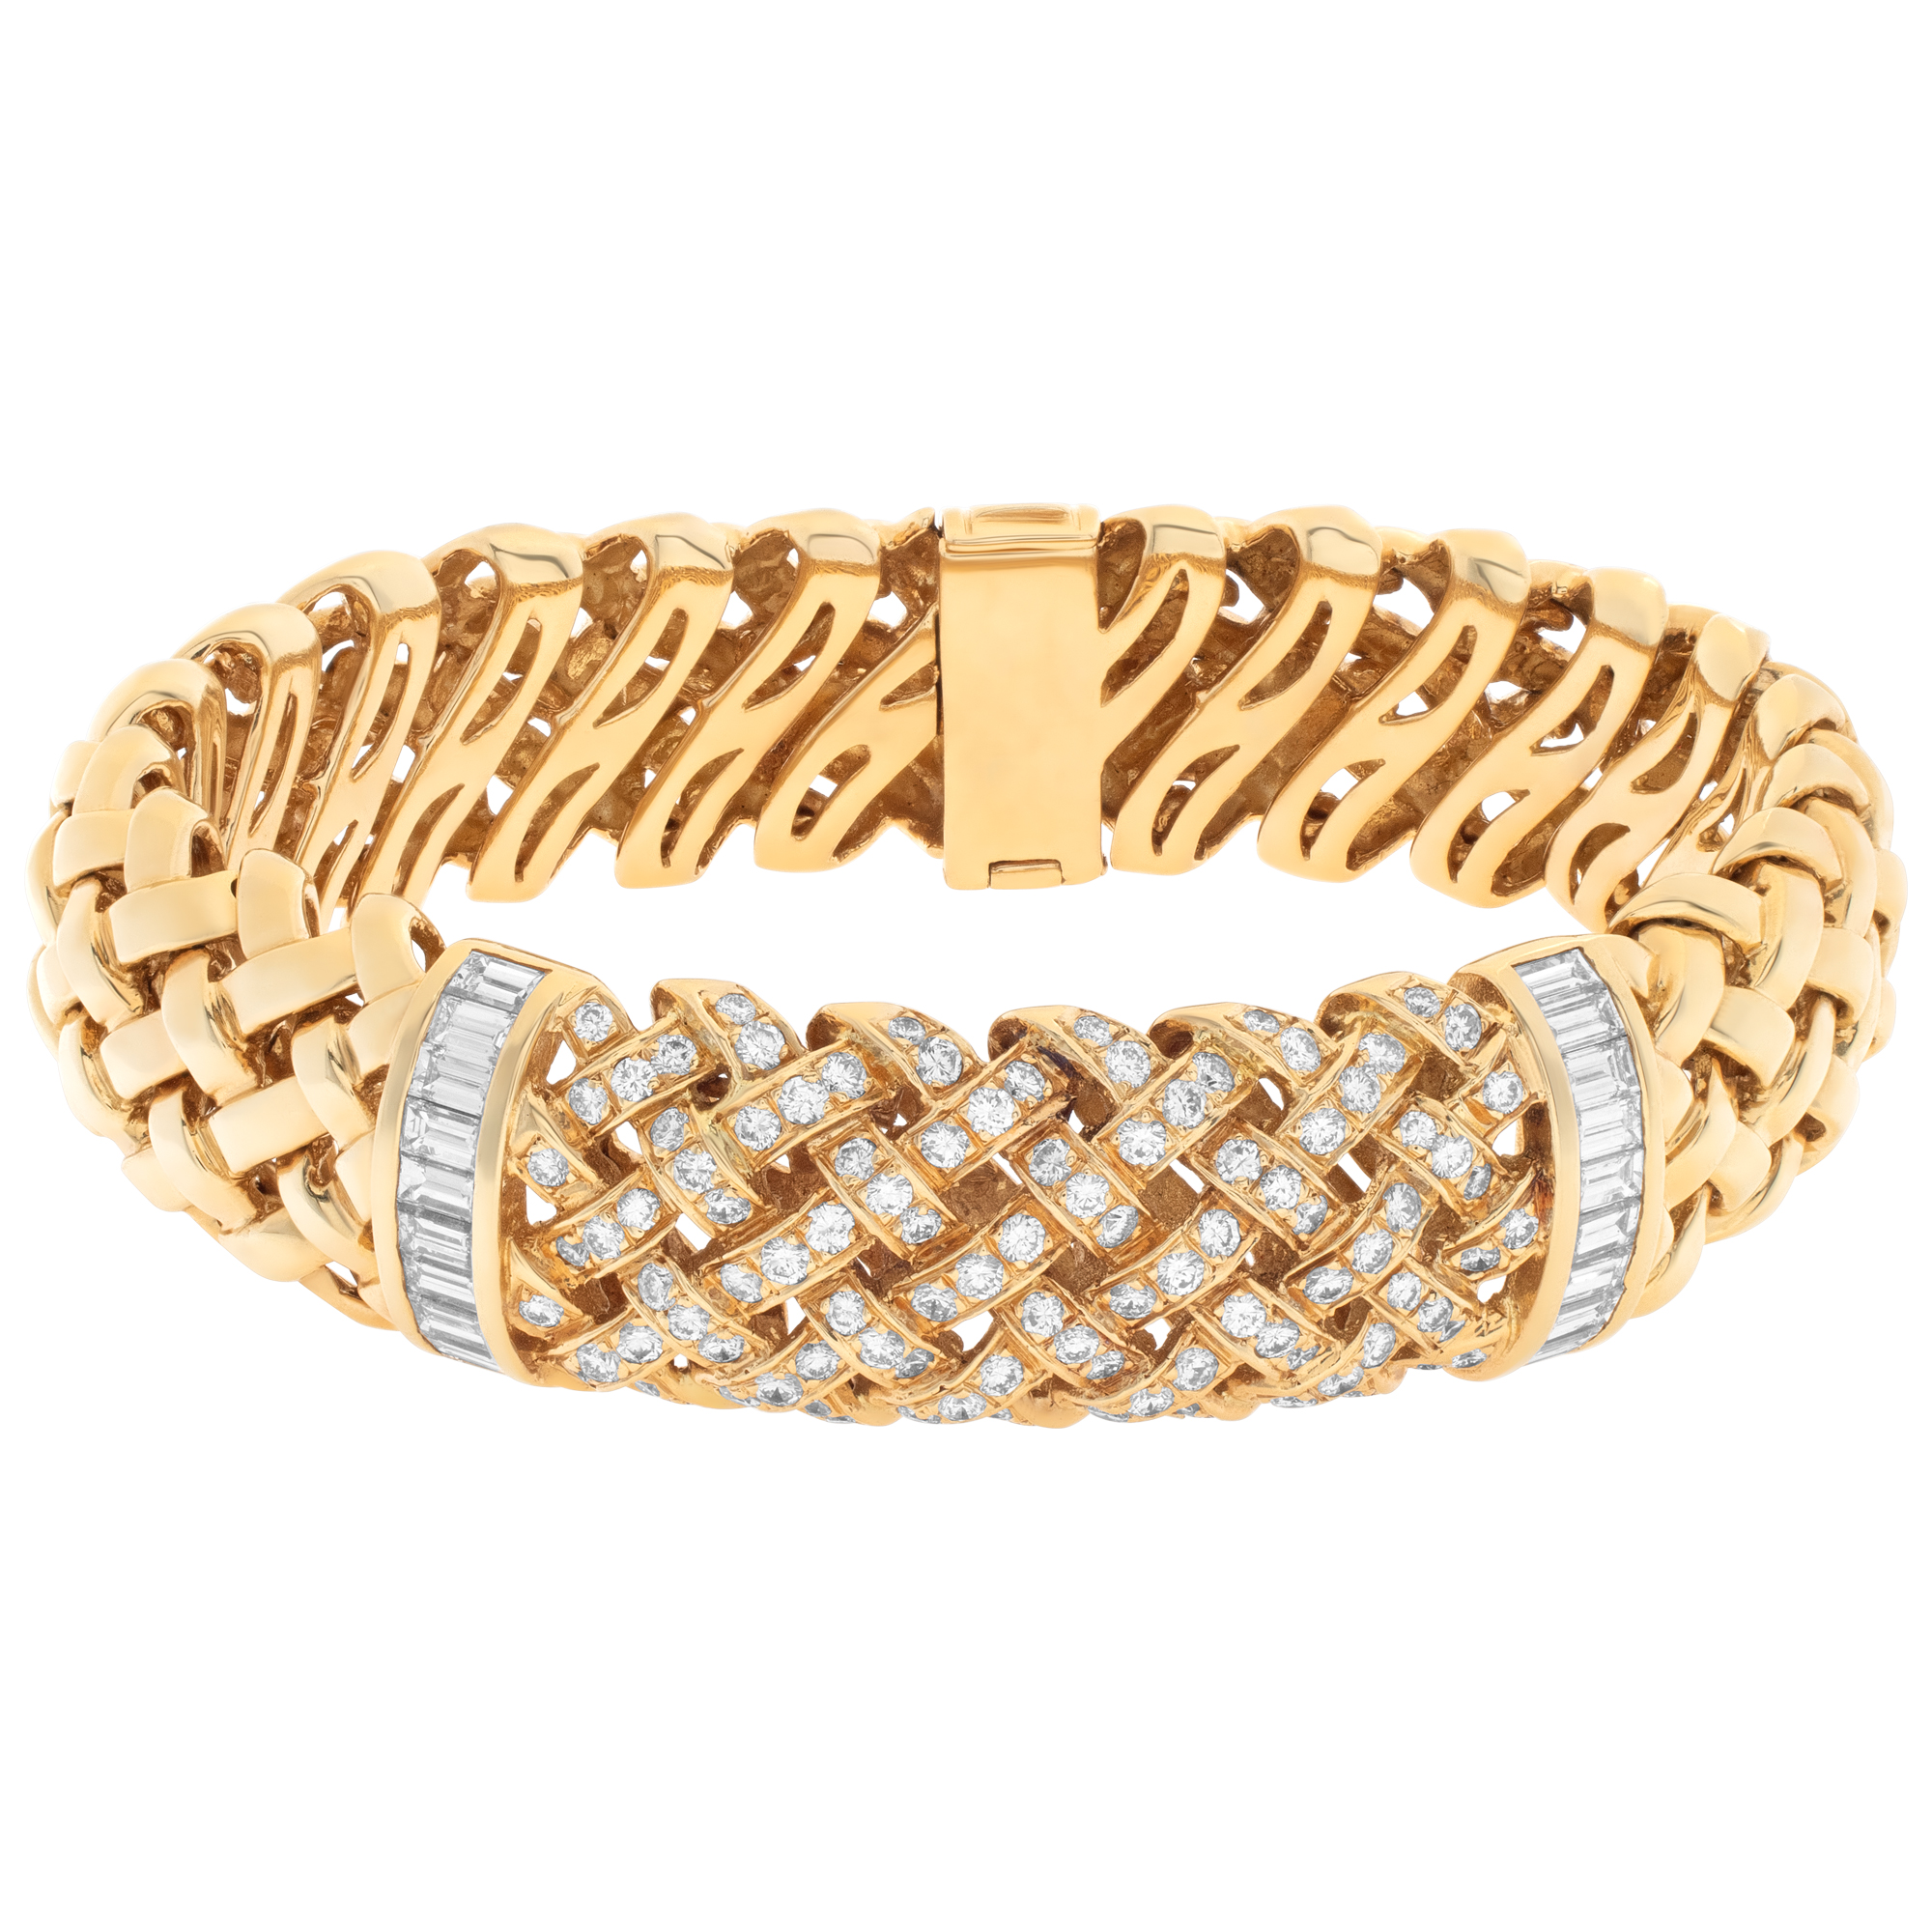 Tiffanny & Co. VANNERIE Collection bracelet in 18K yellow gold image 1